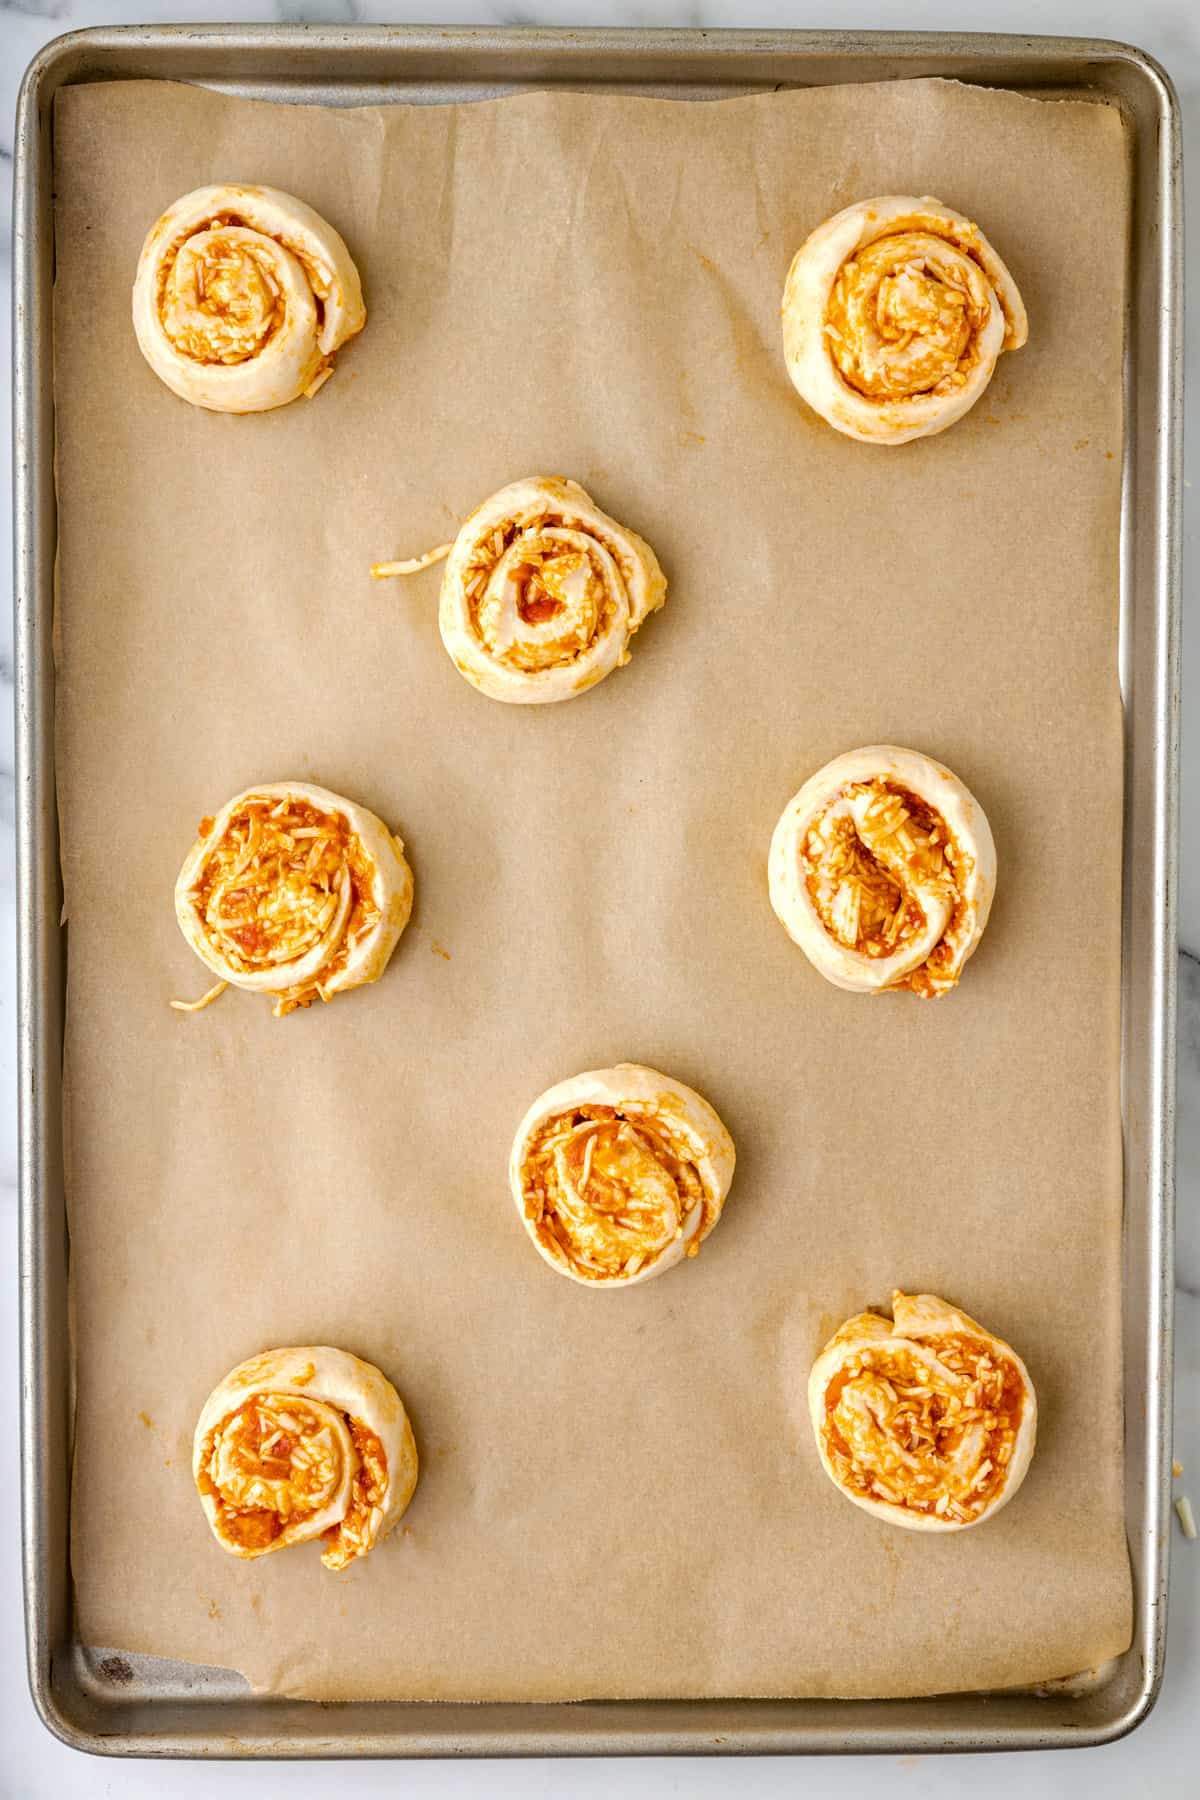 Sheet pan with parchment paper and pizza pinwheels before baking